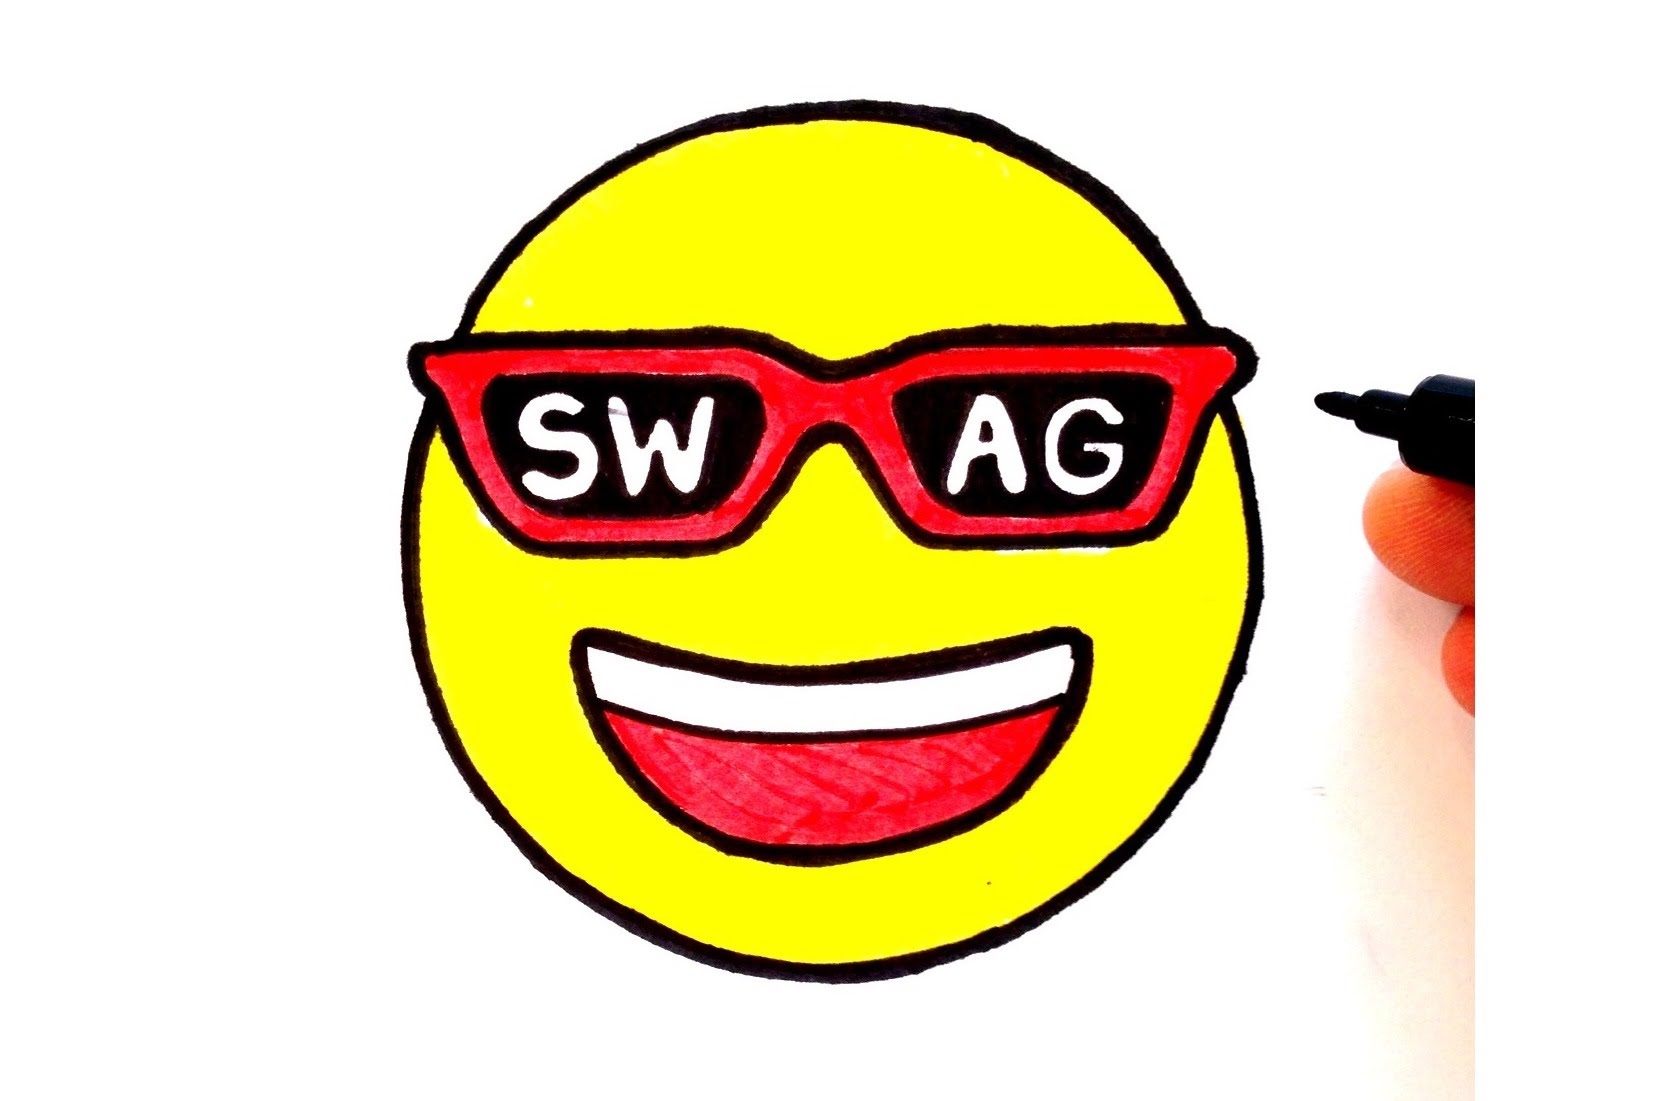 How to Draw a Smiley Face with SWAG! - YouTube